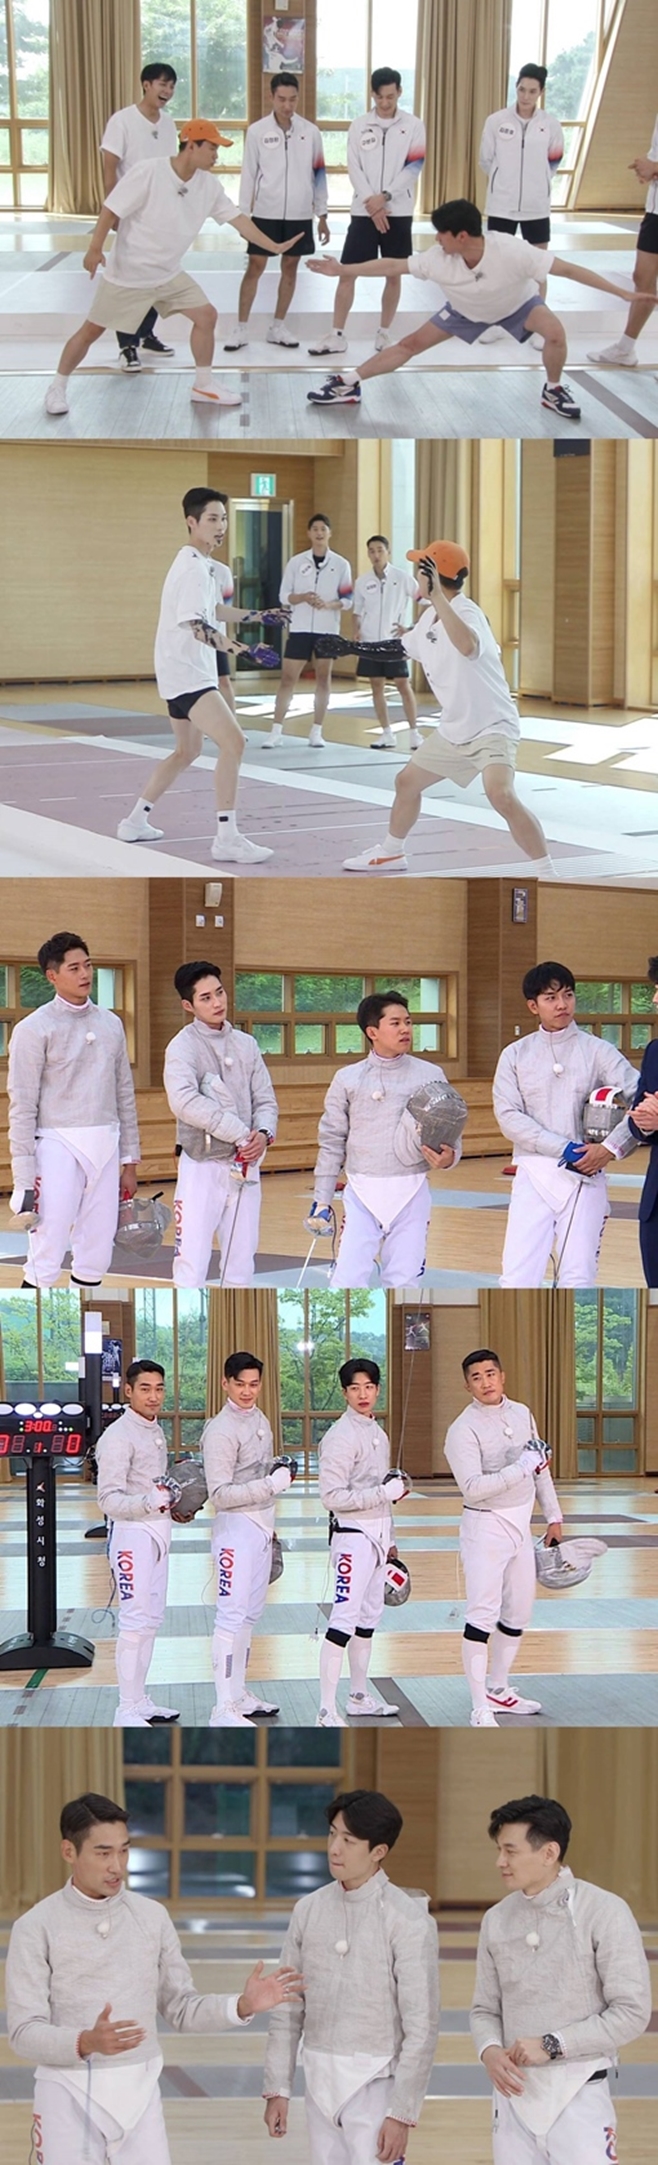 Mens Sabres national team will be featured in All The ButlersIn the SBS entertainment program All The Butlers broadcasted on the 15th, the fencing mens saber team, which achieved the gold medal in the team event at the 2020 Tokyo Olympics, will appear as guests.In the recent recording, fencing mens saber team Kim Jung-hwan, Koo Bon-gil, Kim Jun-ho and Oh Sang-wook appeared as masters and conducted one day fencing class.They stressed that one of the most important factors in fencing is agility, and proposed a hand fencing game to test the agility of members.However, unlike the expectation, as the game progressed, there was a big show where the victory was blinded and the foul was played. In particular, Master Kim Jun-ho said, Fencing is not a gentleman sport?He challenged the members. I wonder what happened.The members also had time to learn the actual fencing and to be conquered, and the masters were divided into OB and YB teams, respectively, and teamed up with the members.In the ensuing fencing confrontation, an unexpected serious duel was unfolded and surprised everyone.Expectations are high that members who did not know the pen of fencing will show growth through the One Day class.Meanwhile, All The Butlers, starring the fencing national team, will be broadcast at 6:30 pm on the 15th.